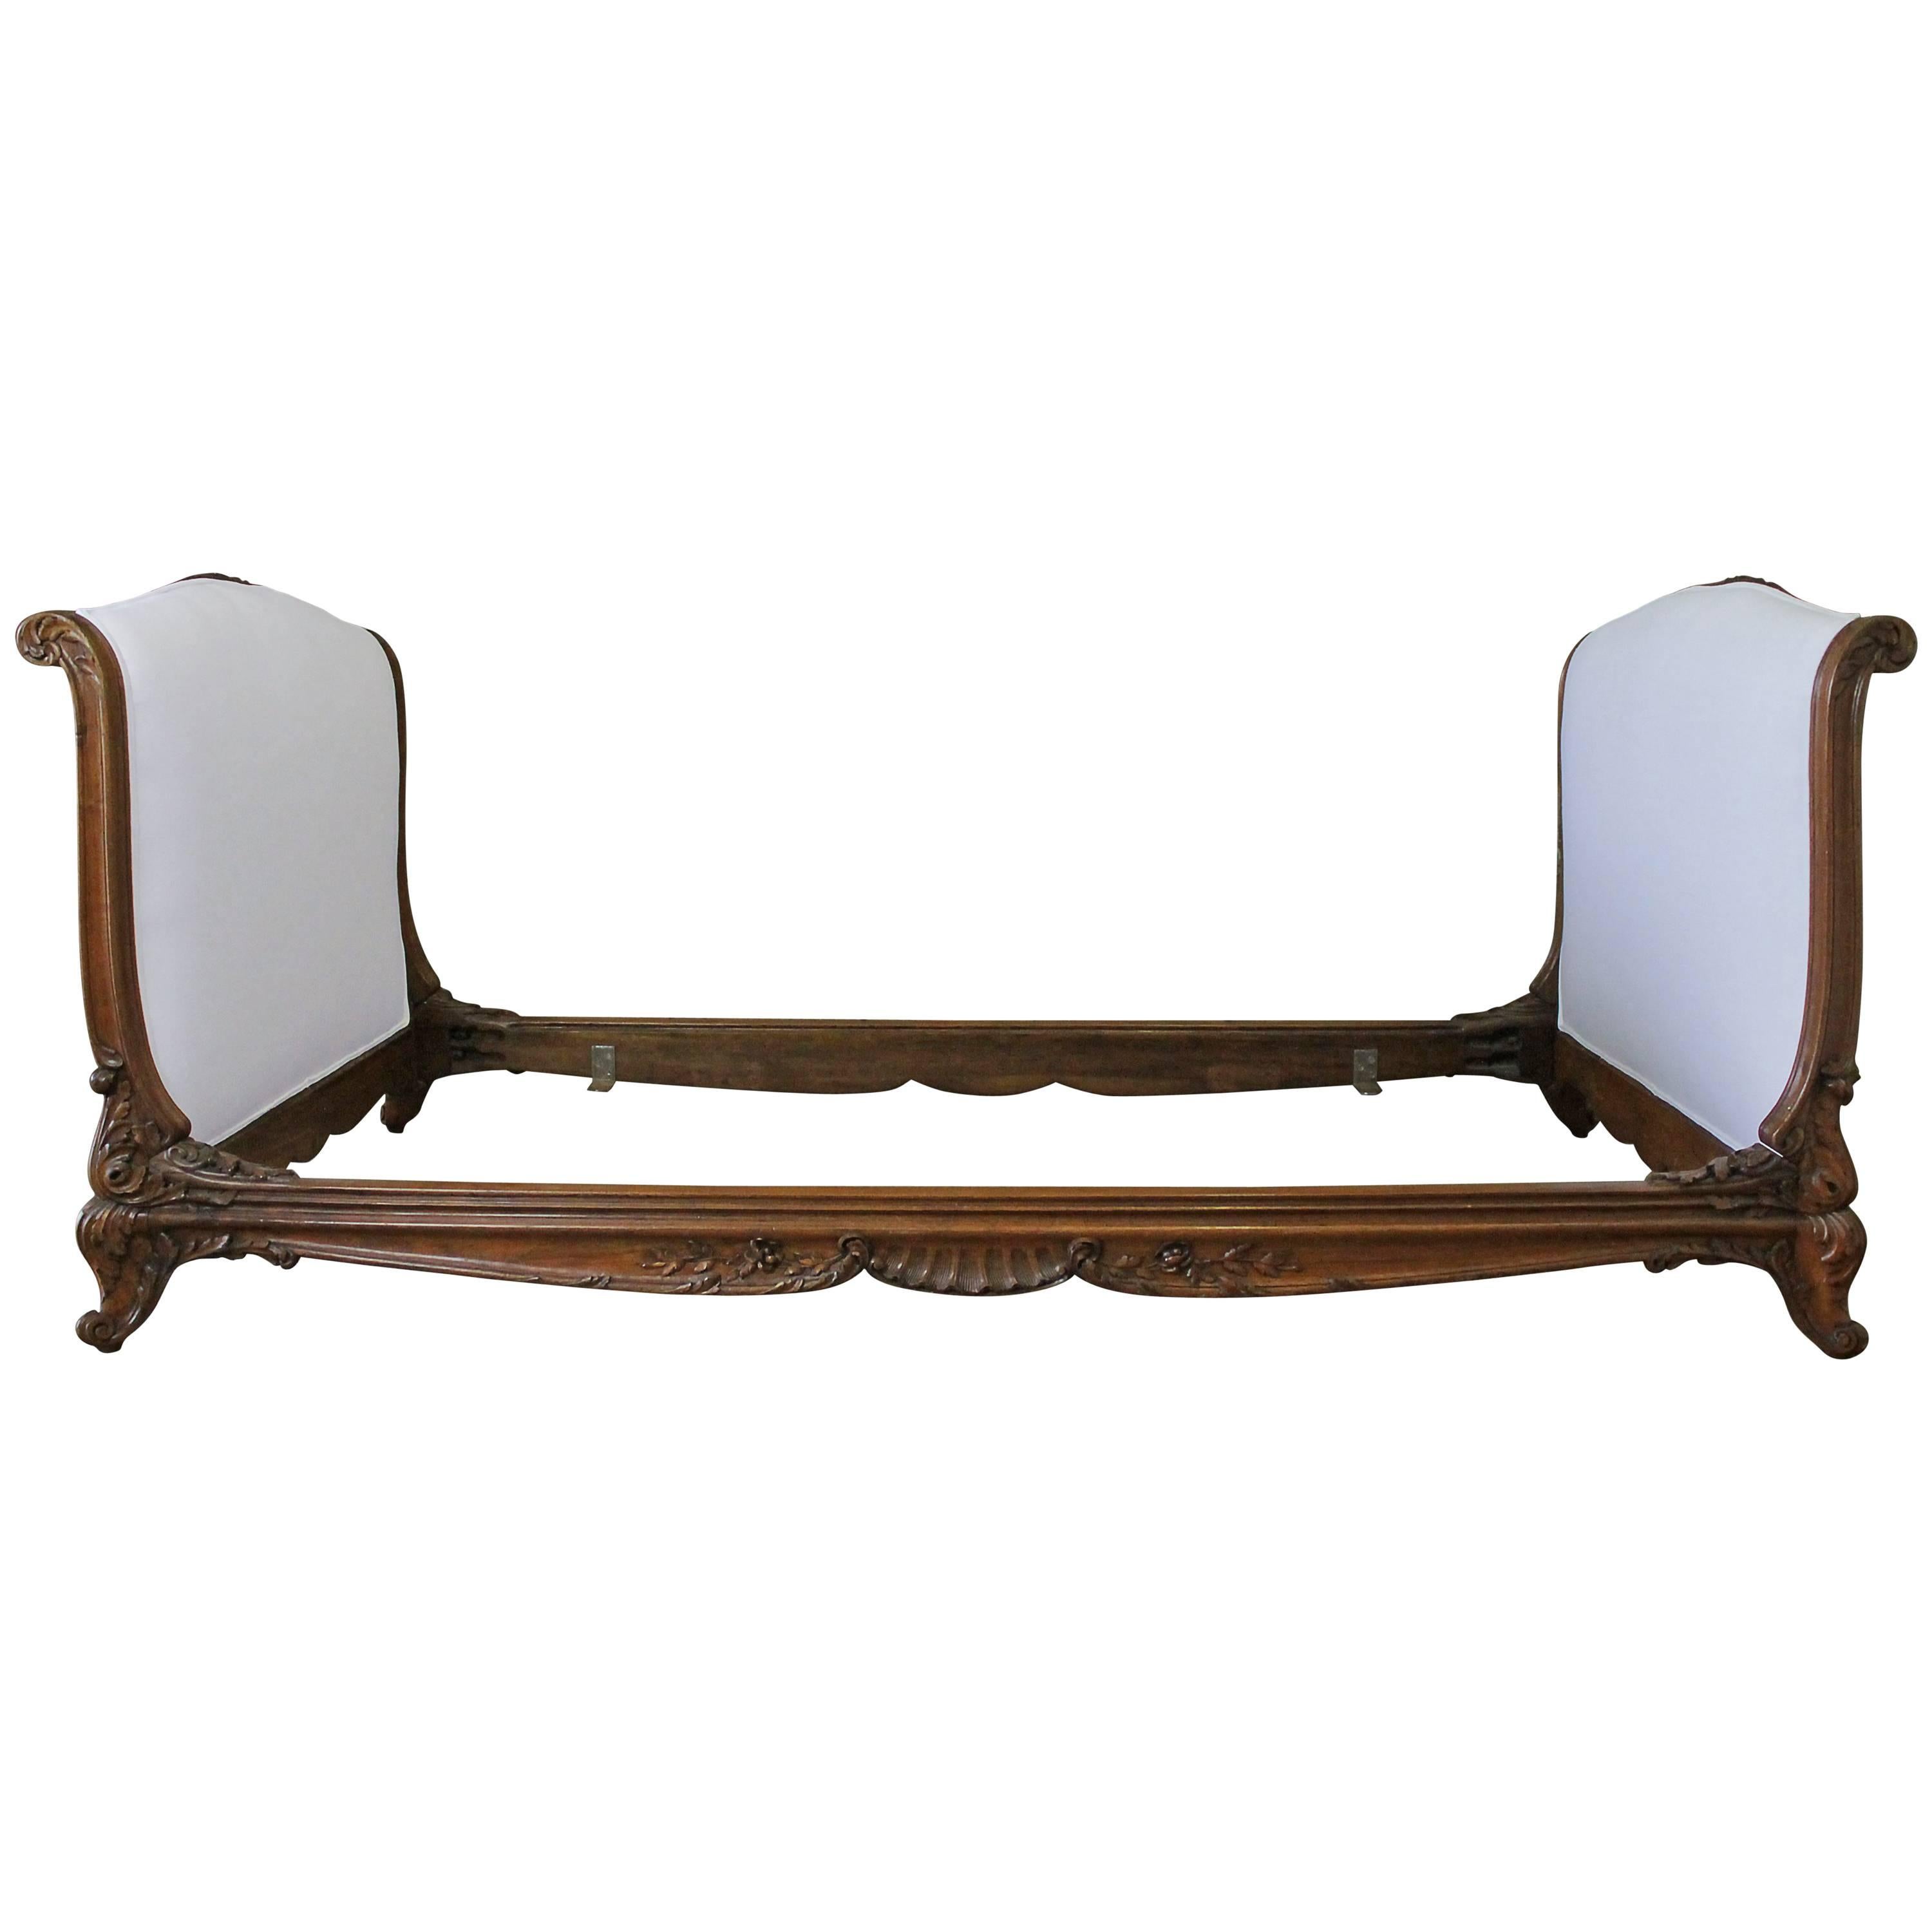 Late 19th Century Carved Walnut Daybed Upholstered in White Belgian Linen